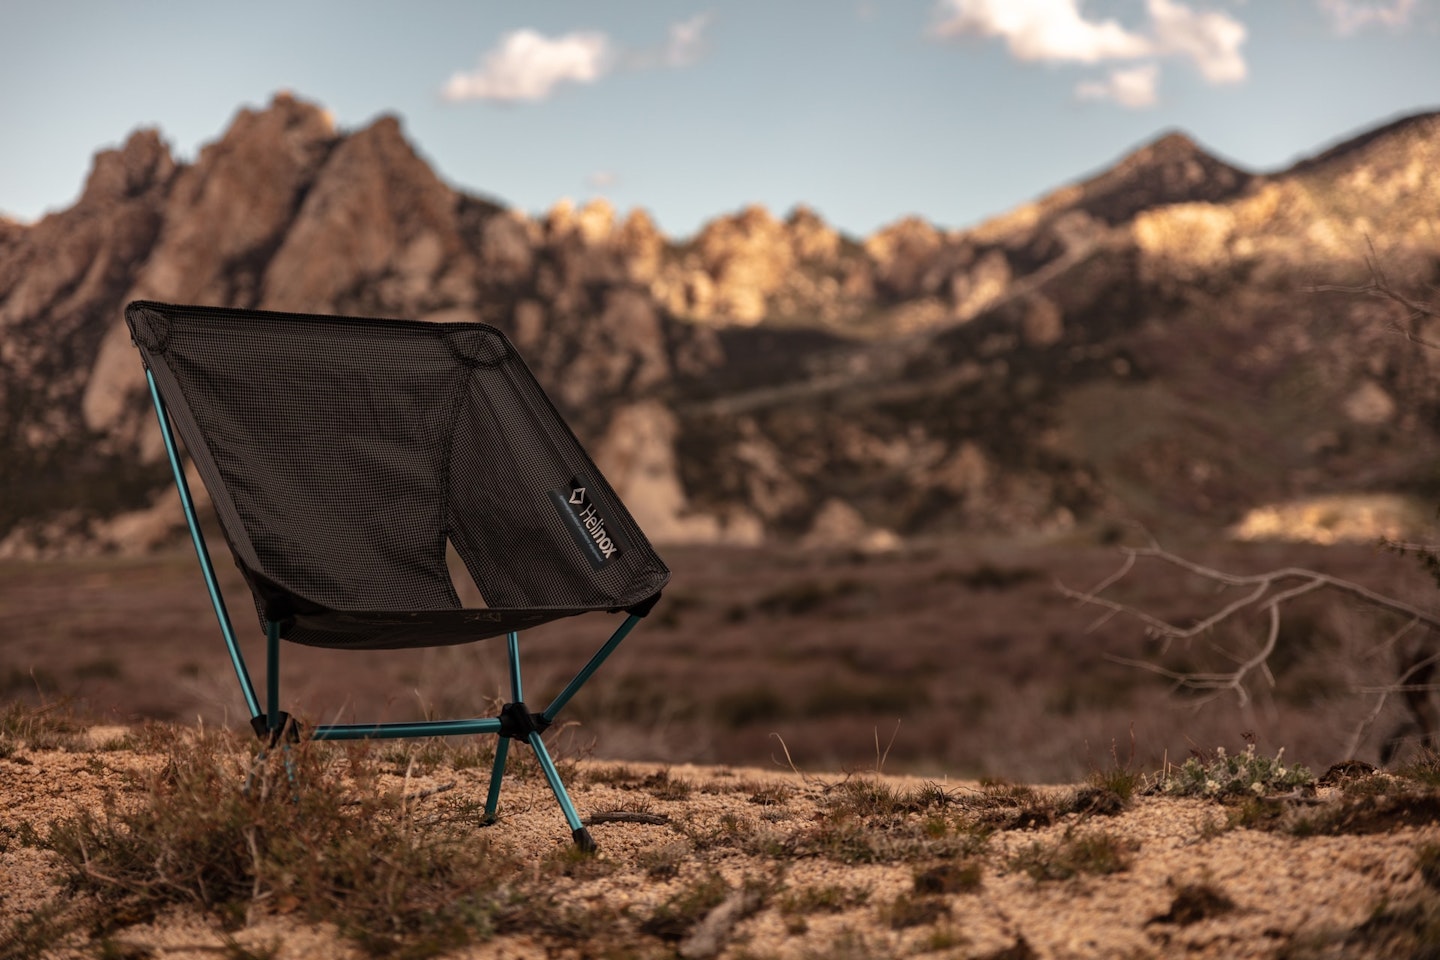 https://images.bauerhosting.com/legacy/media/60e2/c4fb/1fef/d58b/a2bf/ca53/the-best-camping-chairs-patrick-hendry.jpg?ar=16%3A9&fit=crop&crop=top&auto=format&w=1440&q=80